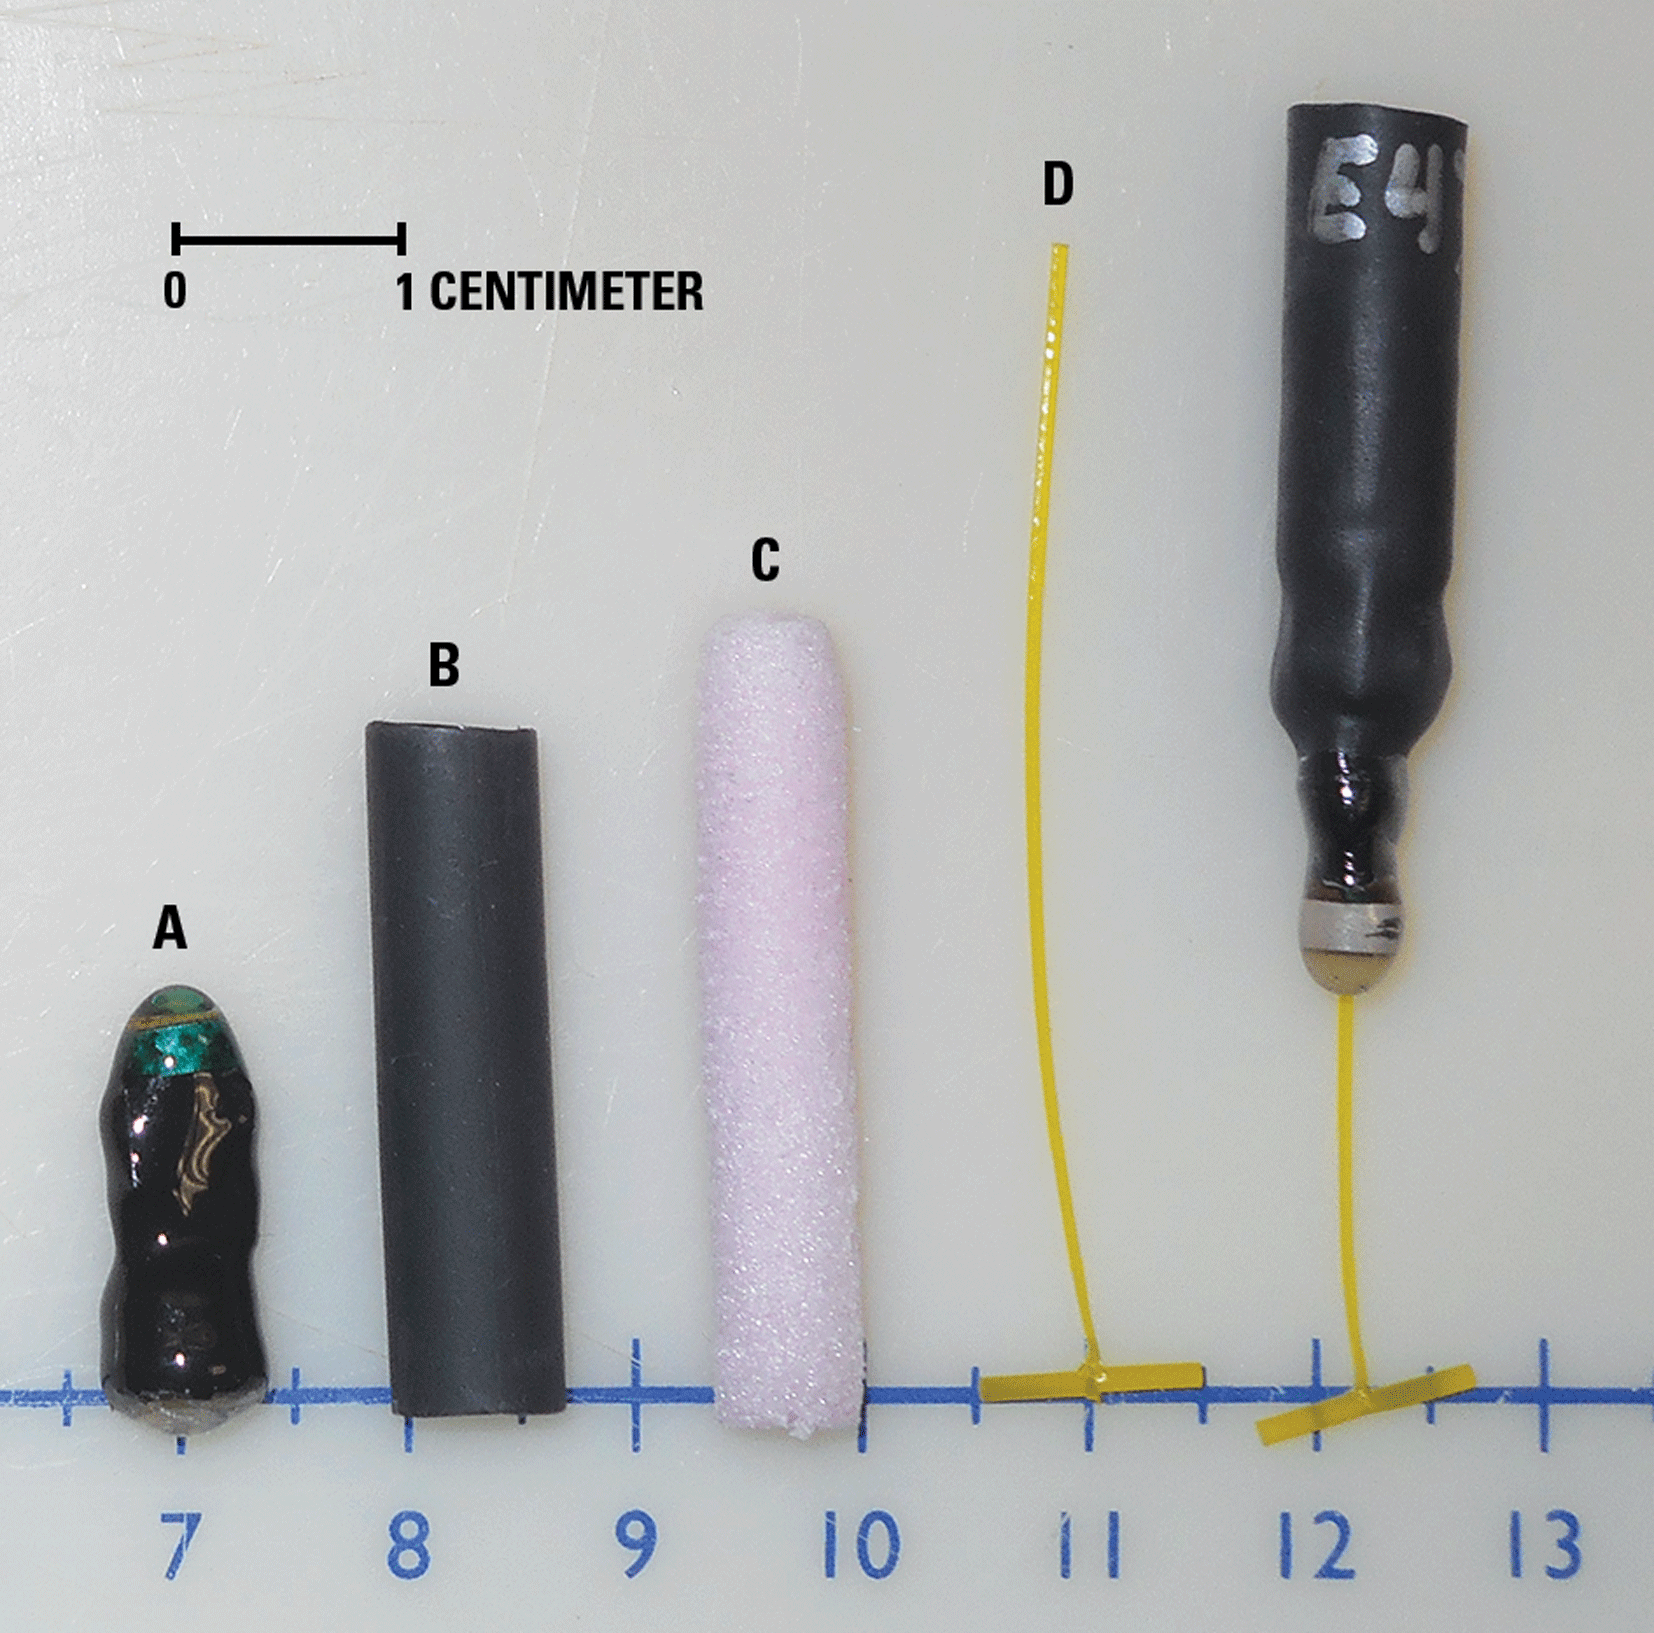 Photograph showing materials used to construct the external acoustic transmitter attachment
                        device and the assembled device.